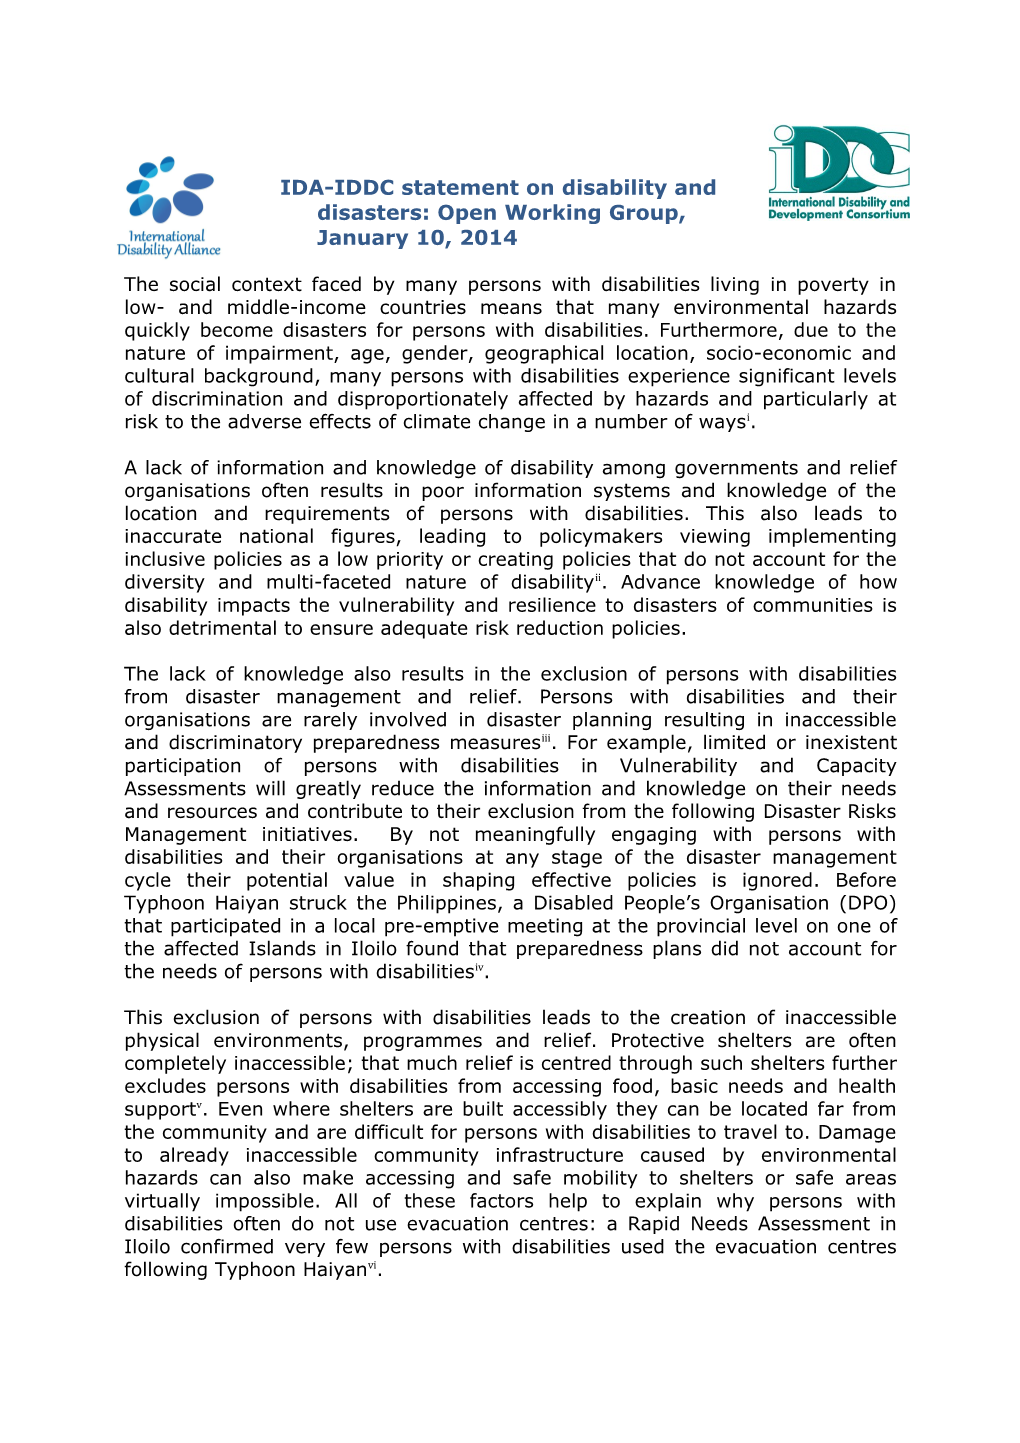 IDA-IDDC Statement on Disability and Disasters: Open Working Group, January 10, 2014